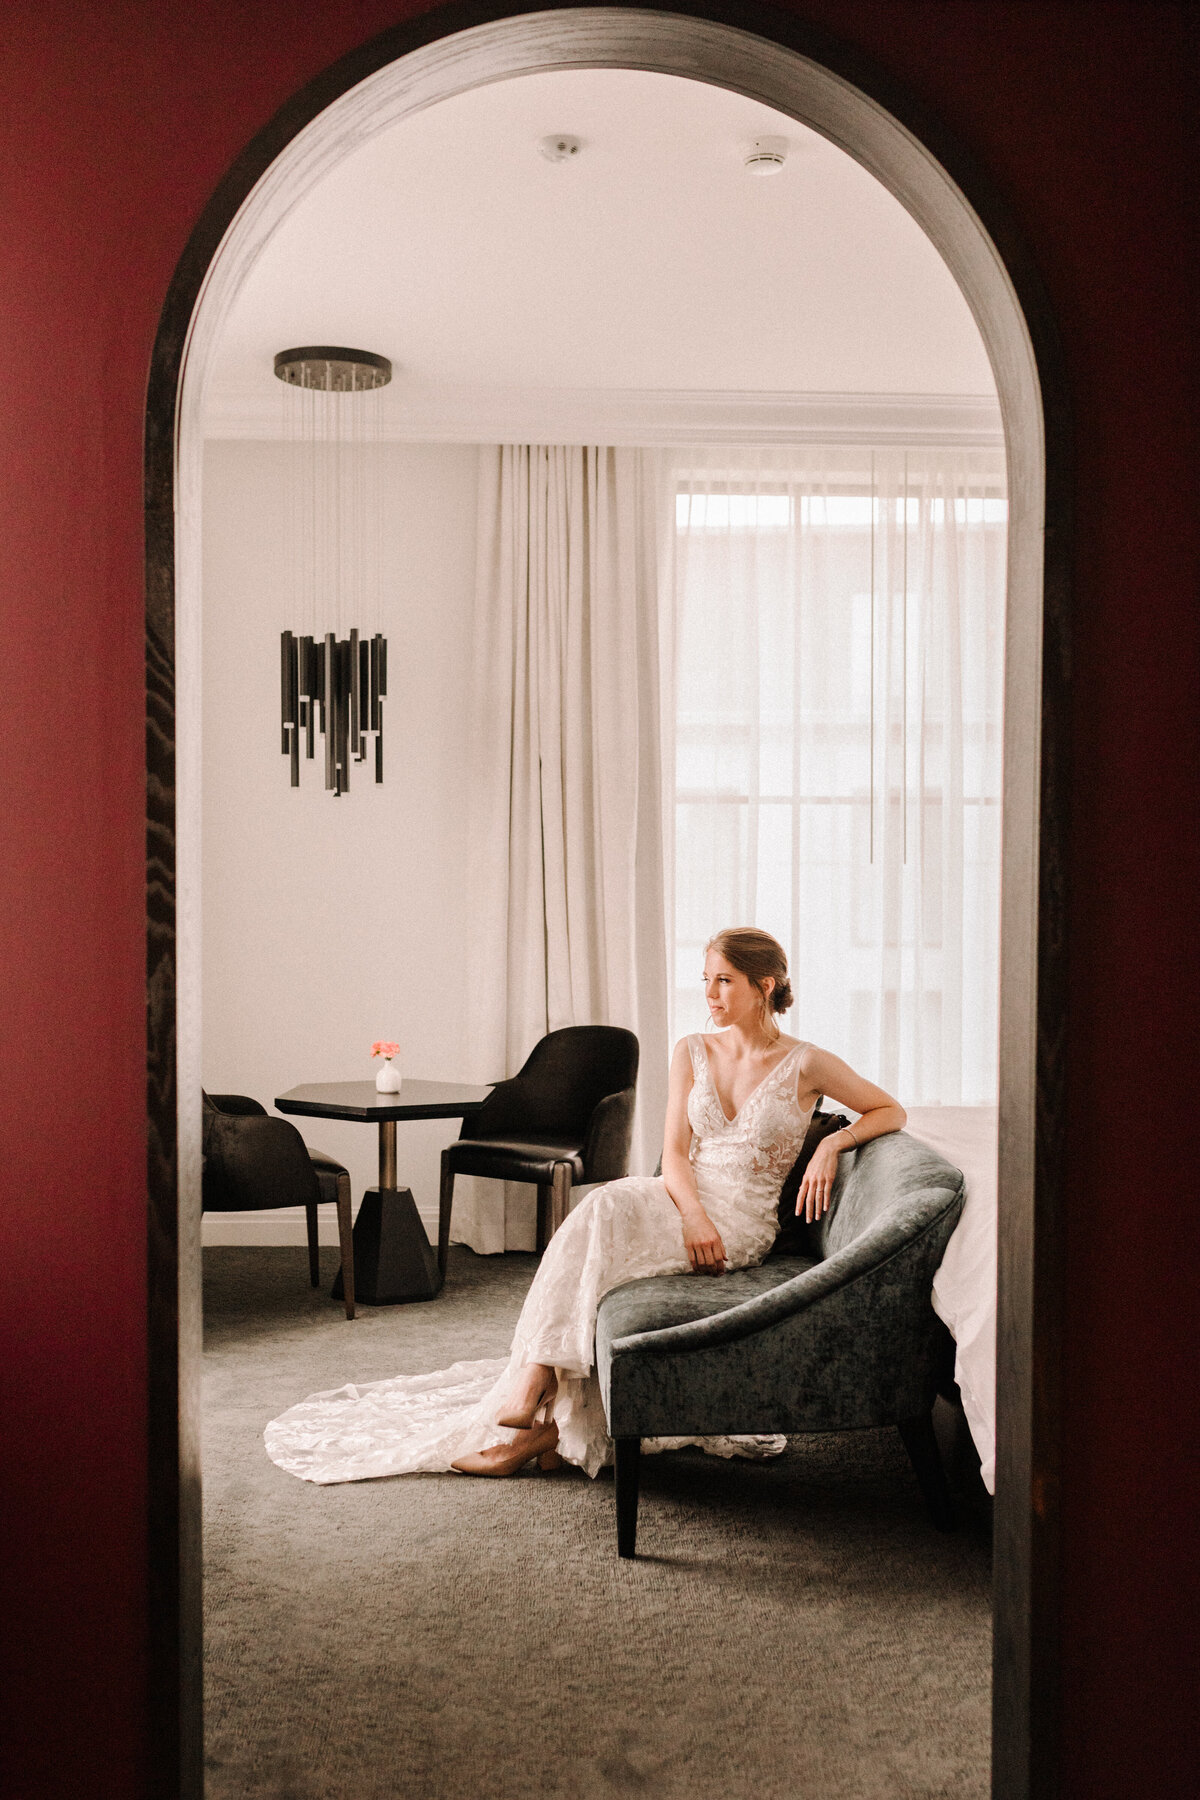 bride sitting next to a bed in a hotel room